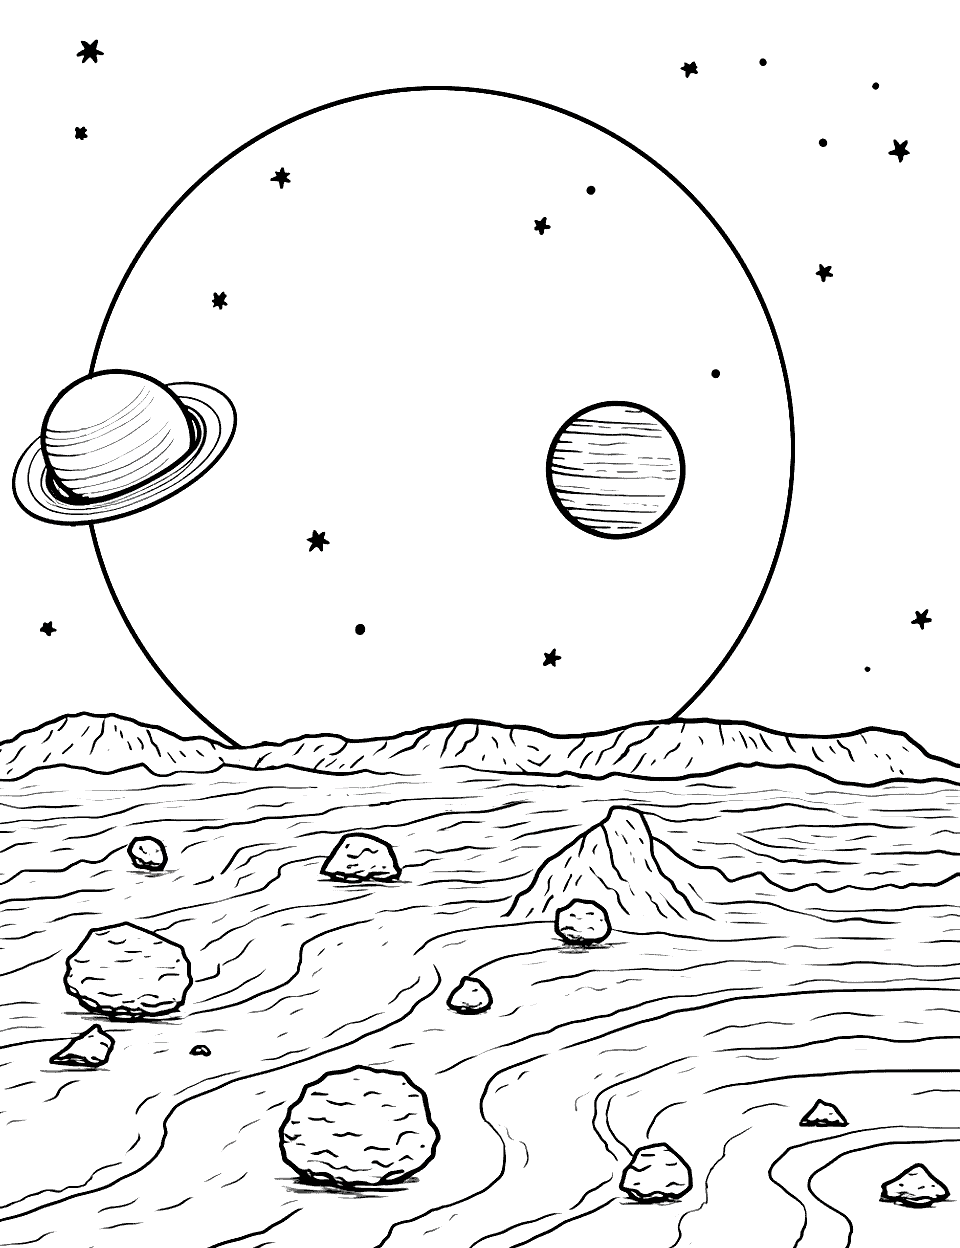 Mercury's Rocky Surface Solar System Coloring Page - A barren, crater-filled landscape of Mercury with small rocks.